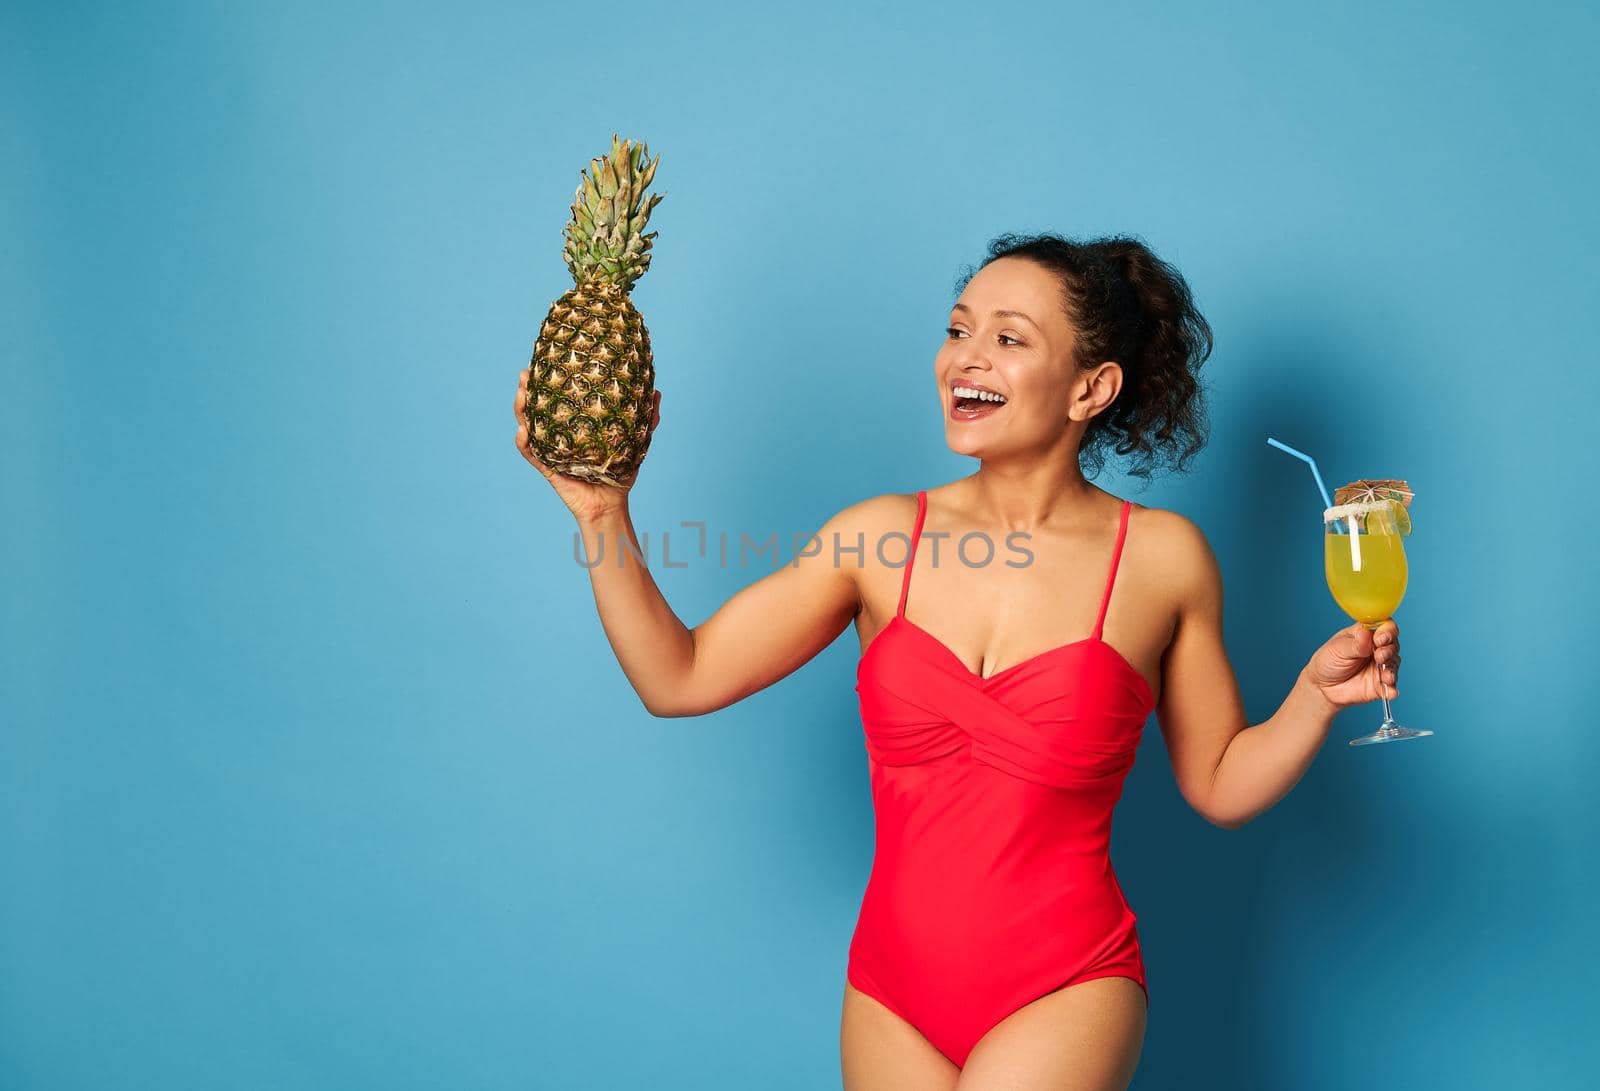 Muscular build woman in red swimsuit with a pineapple and cocktail in hands posing over blue background with copy space